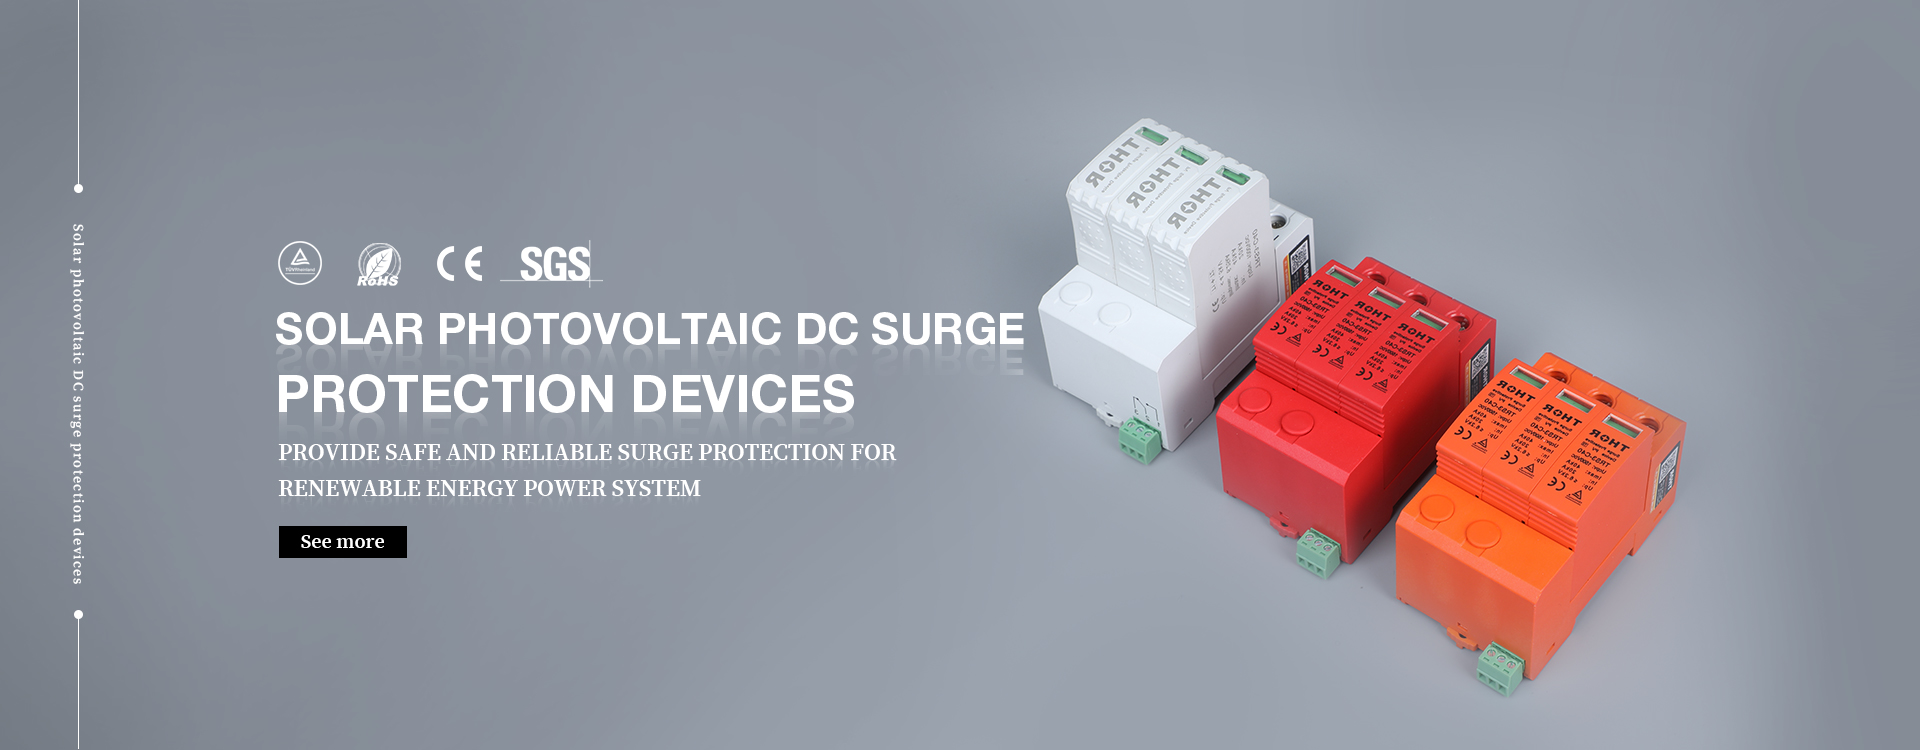 DC Surge Protection Toestel